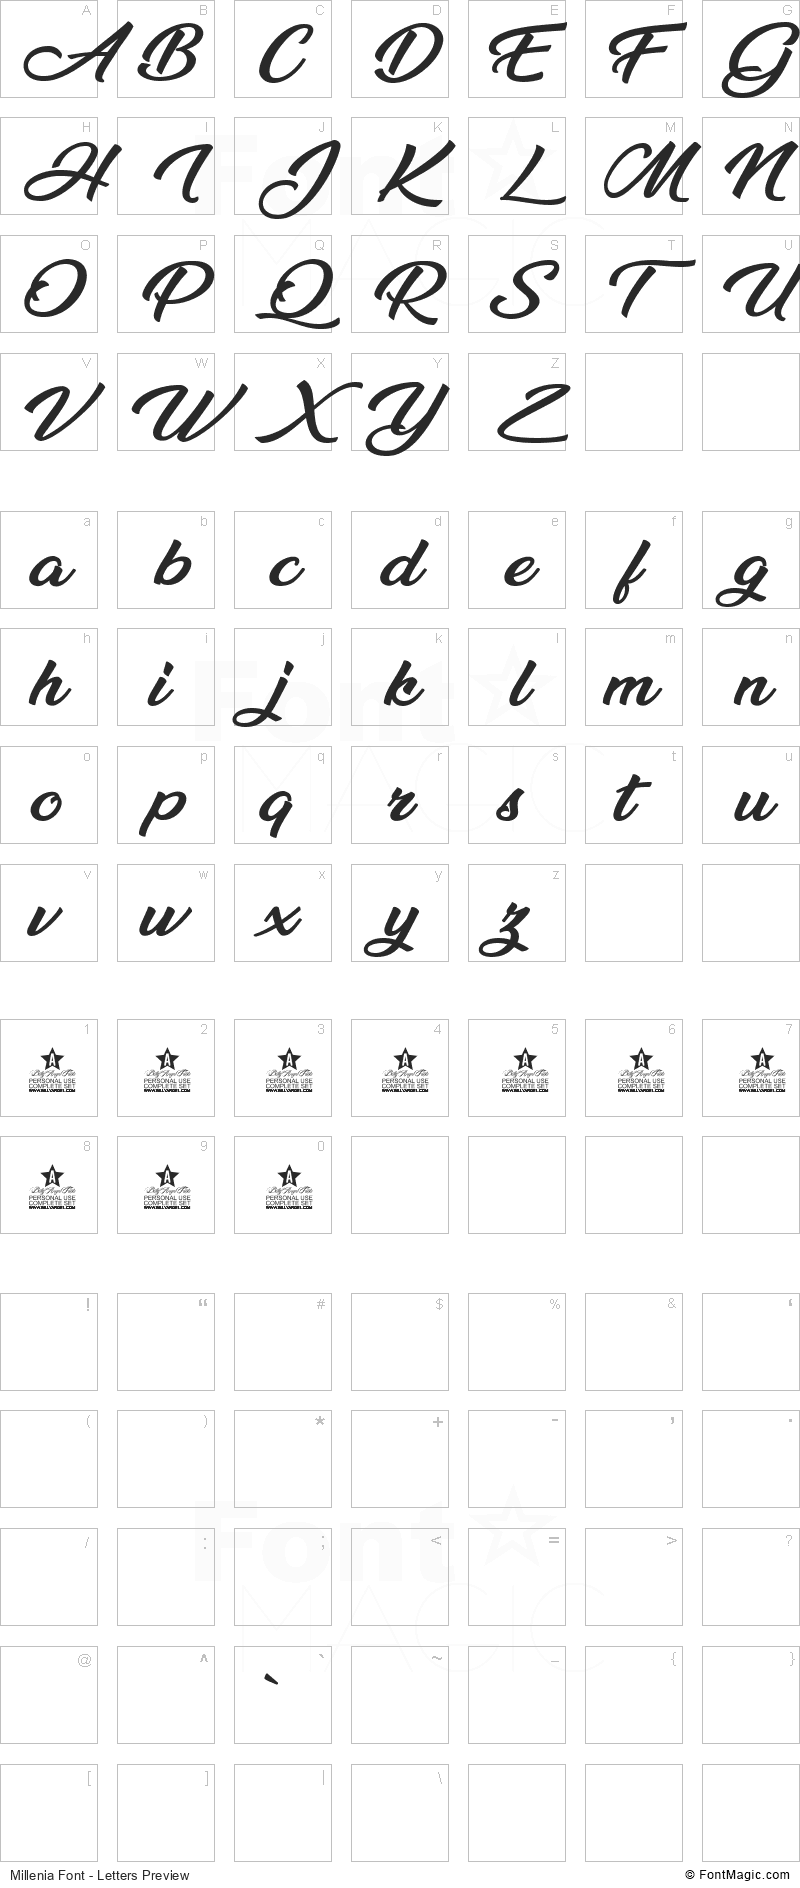 Millenia Font - All Latters Preview Chart